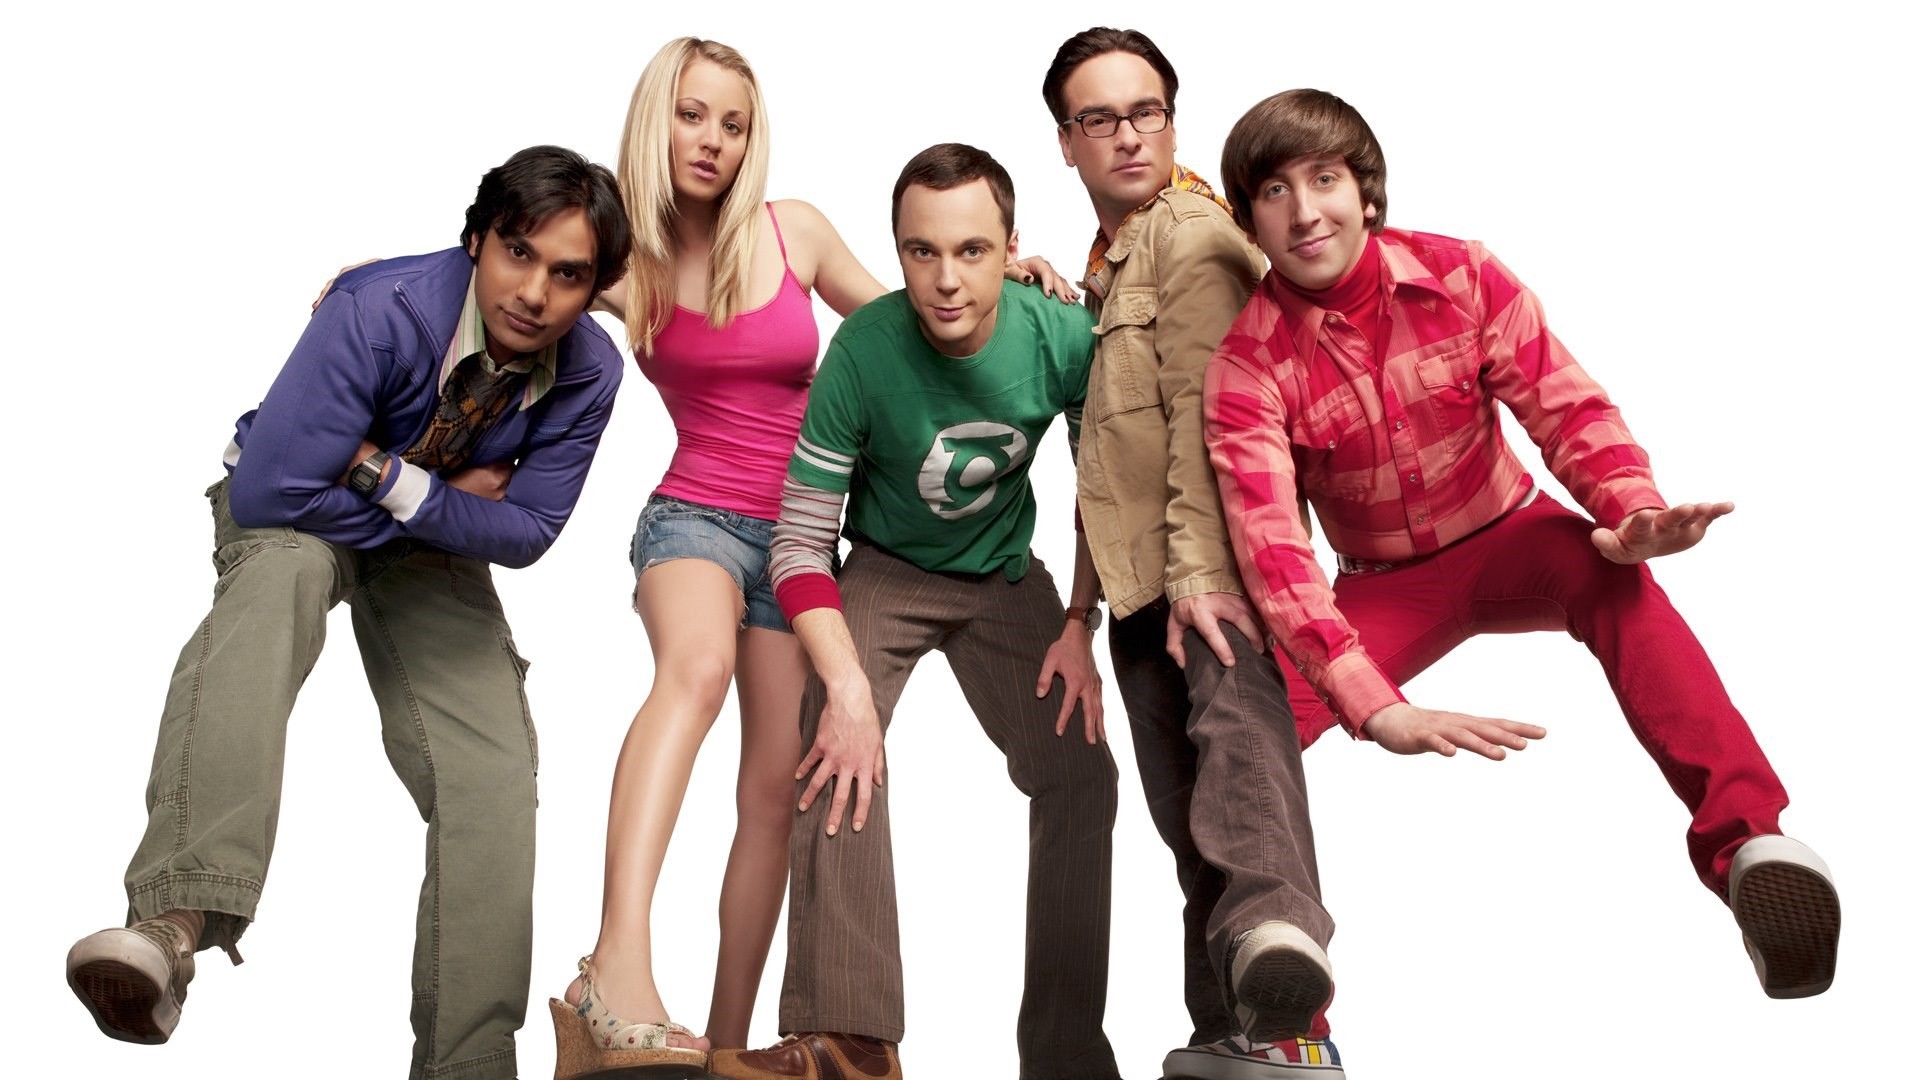 1920x1080 The Big Bang Theory HD Wallpapers For Desktop Download